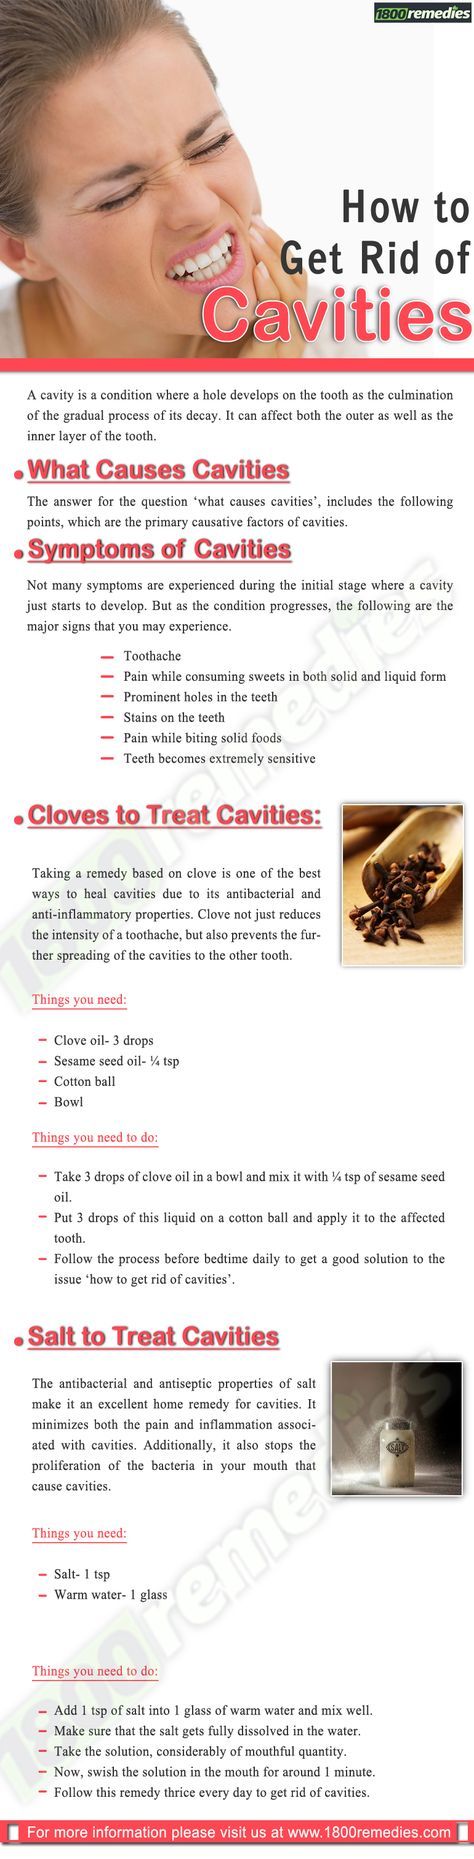 Dental Health, Oral Health Care, Oral Health, Remedies For Tooth Ache, Getting Rid Of Cavities Naturally, Heal Cavities, How To Prevent Cavities, Teeth Health, Health Remedies